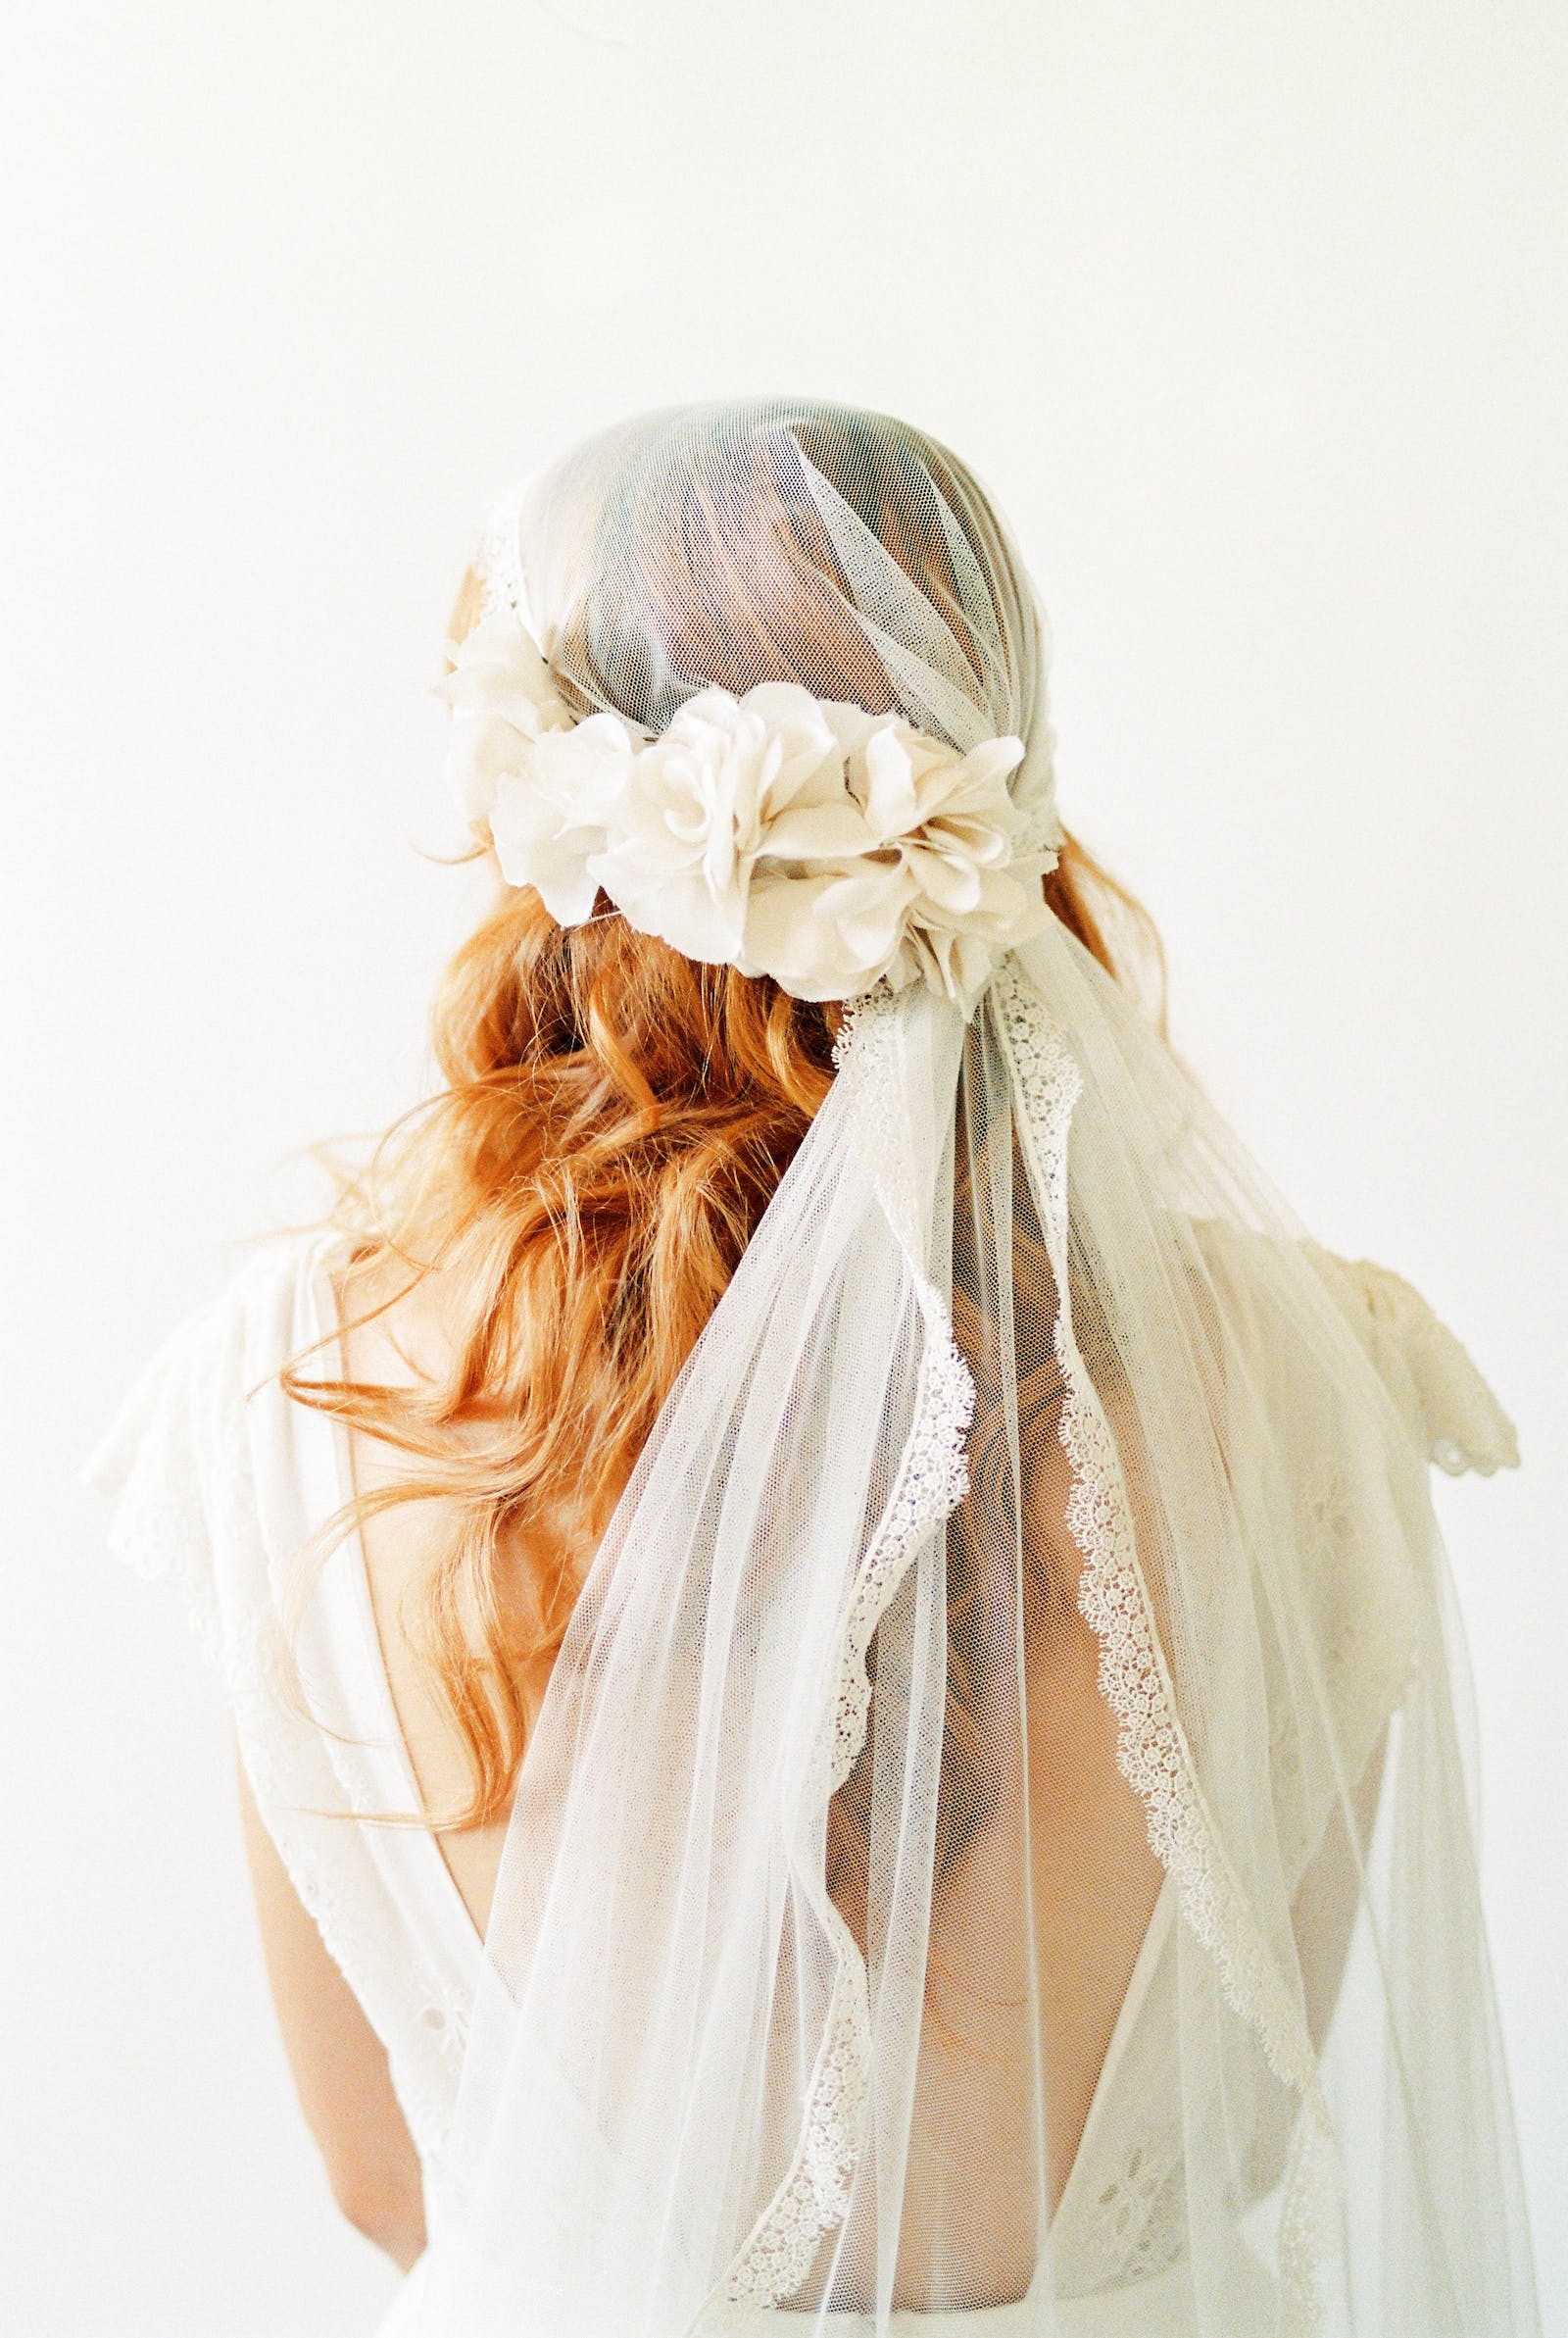 back of bride's head with 30s style veil with lace detail brought together with white silk flowers over long auburn hair  